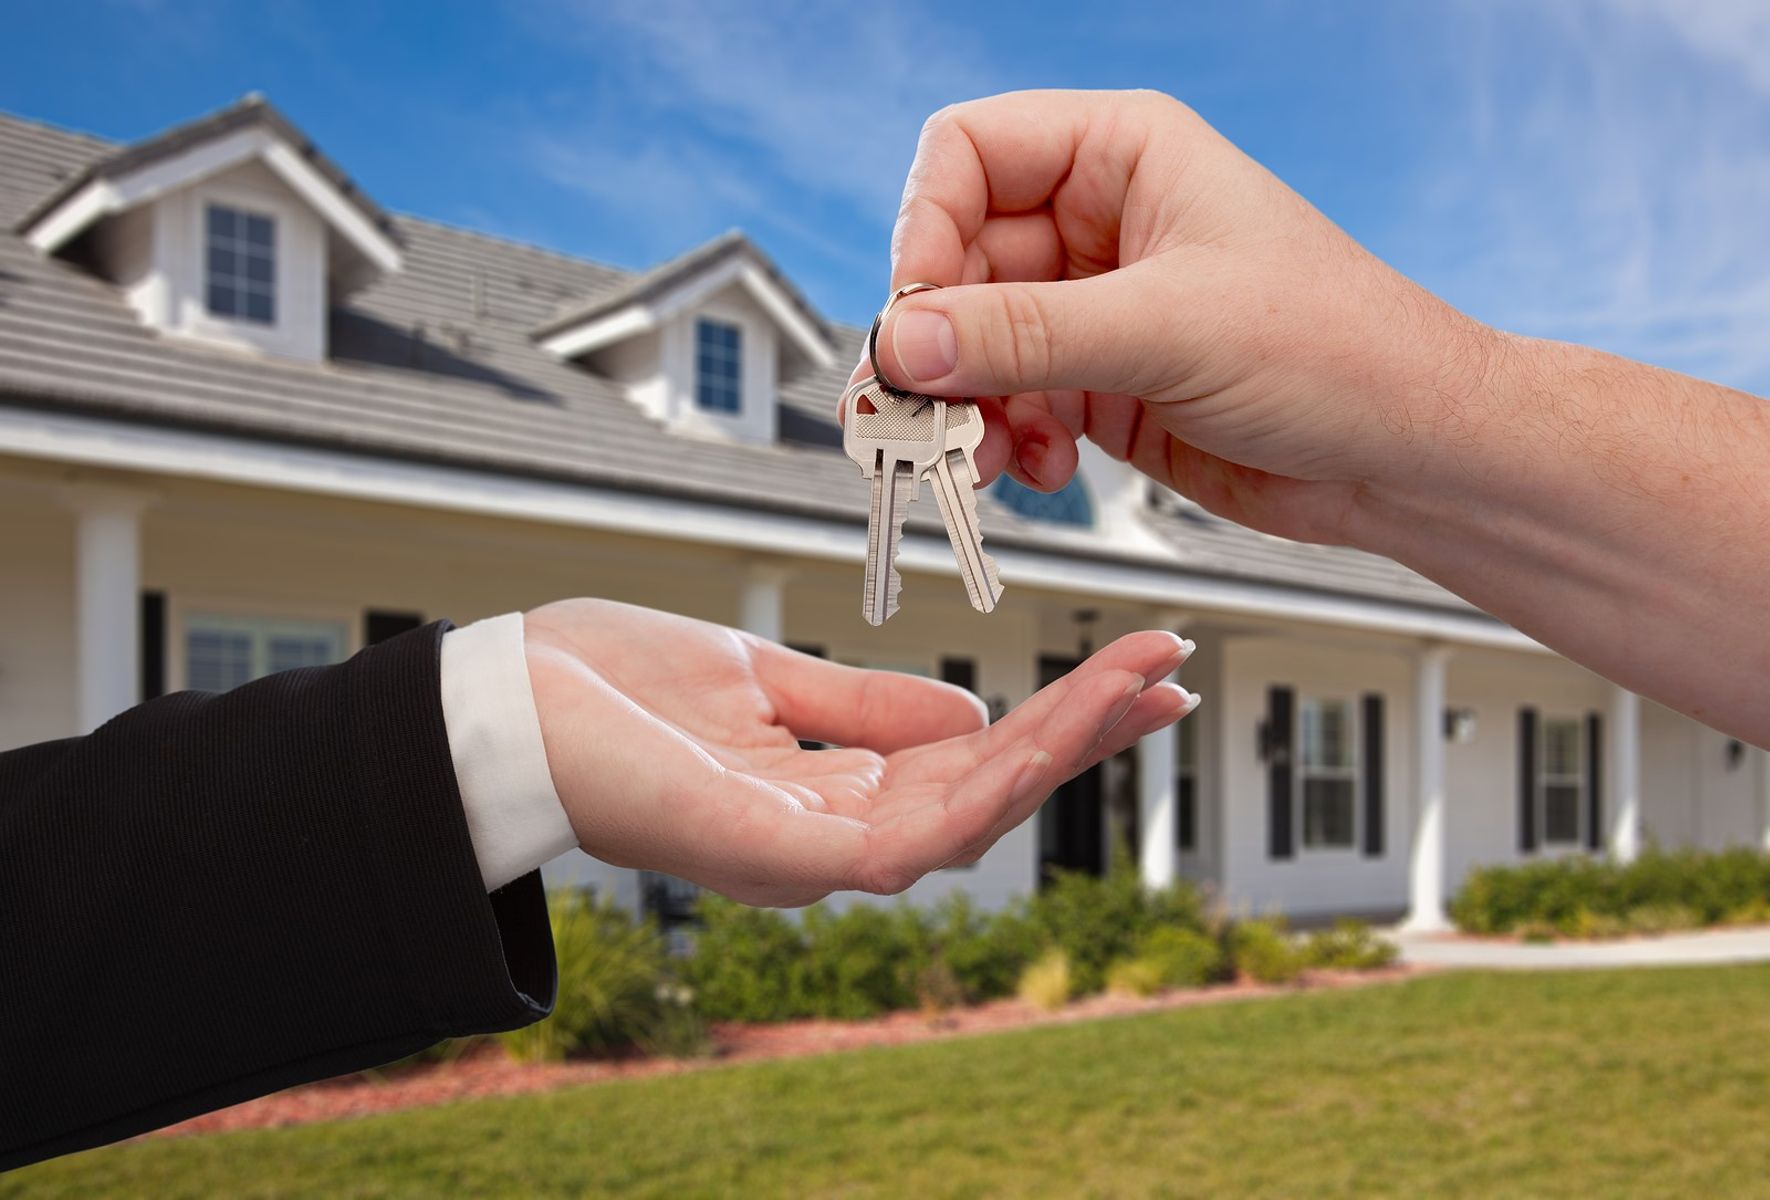 5 tips to reduce the cost of home ownership